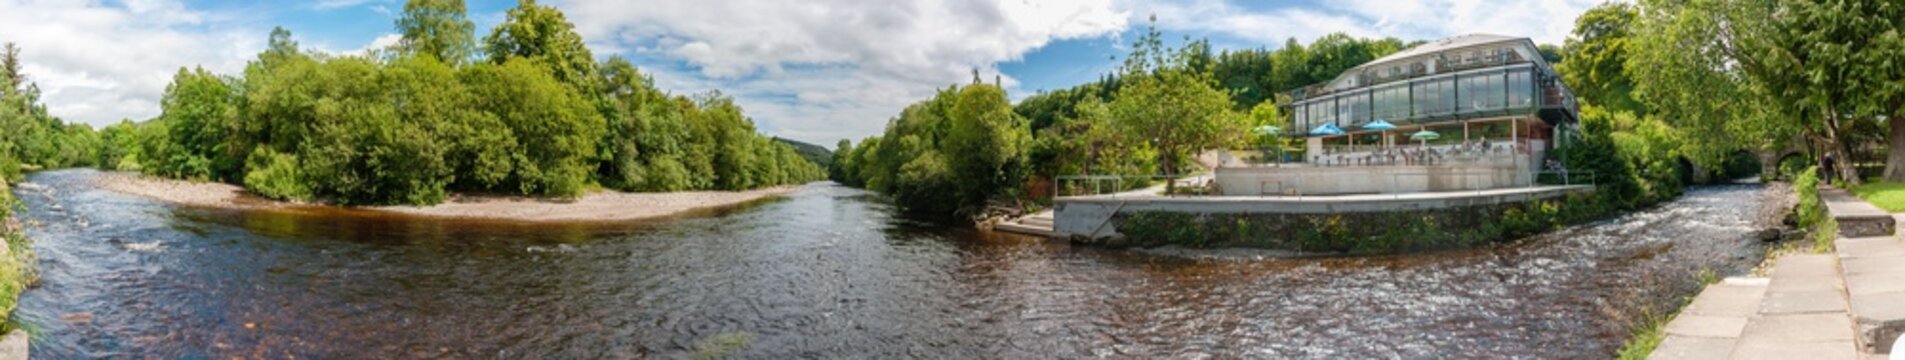 Panorama Of The Meeting Of The Waters, Wicklow, Ireland, Where Two Rivers Meet.